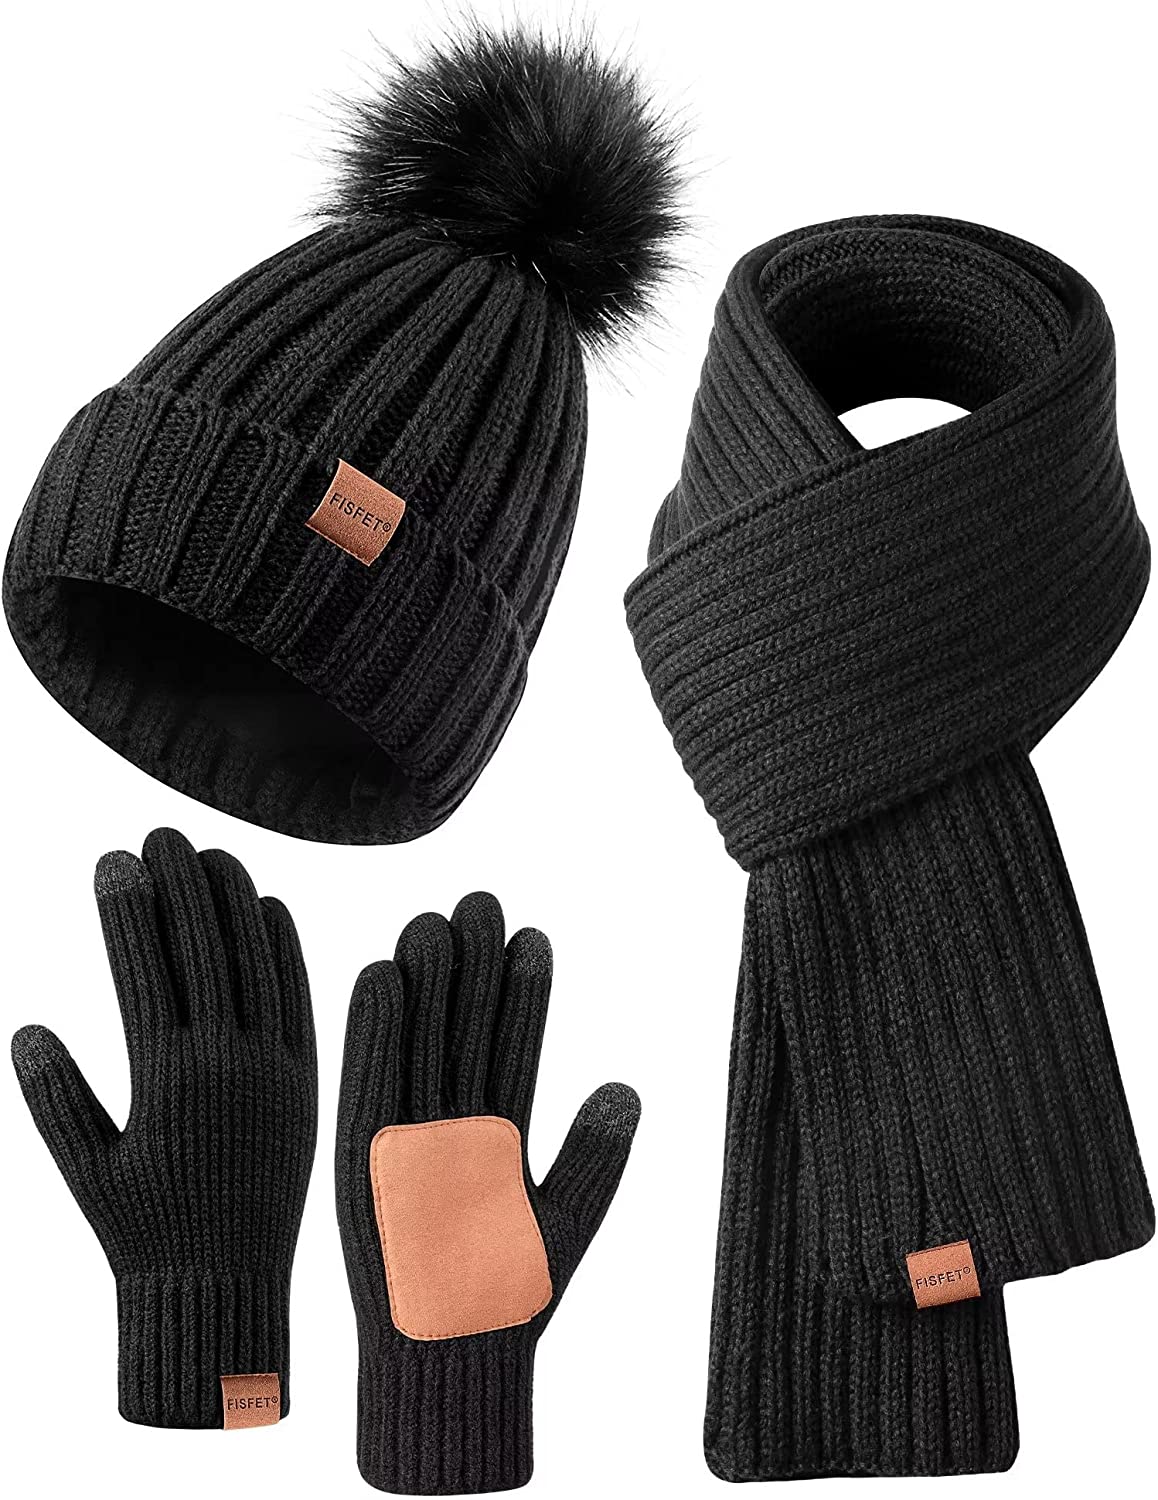 Womens Beanie with Pom Pom Long Scarf Neck Warmer Touchscreen Gloves 3 in 1 Set